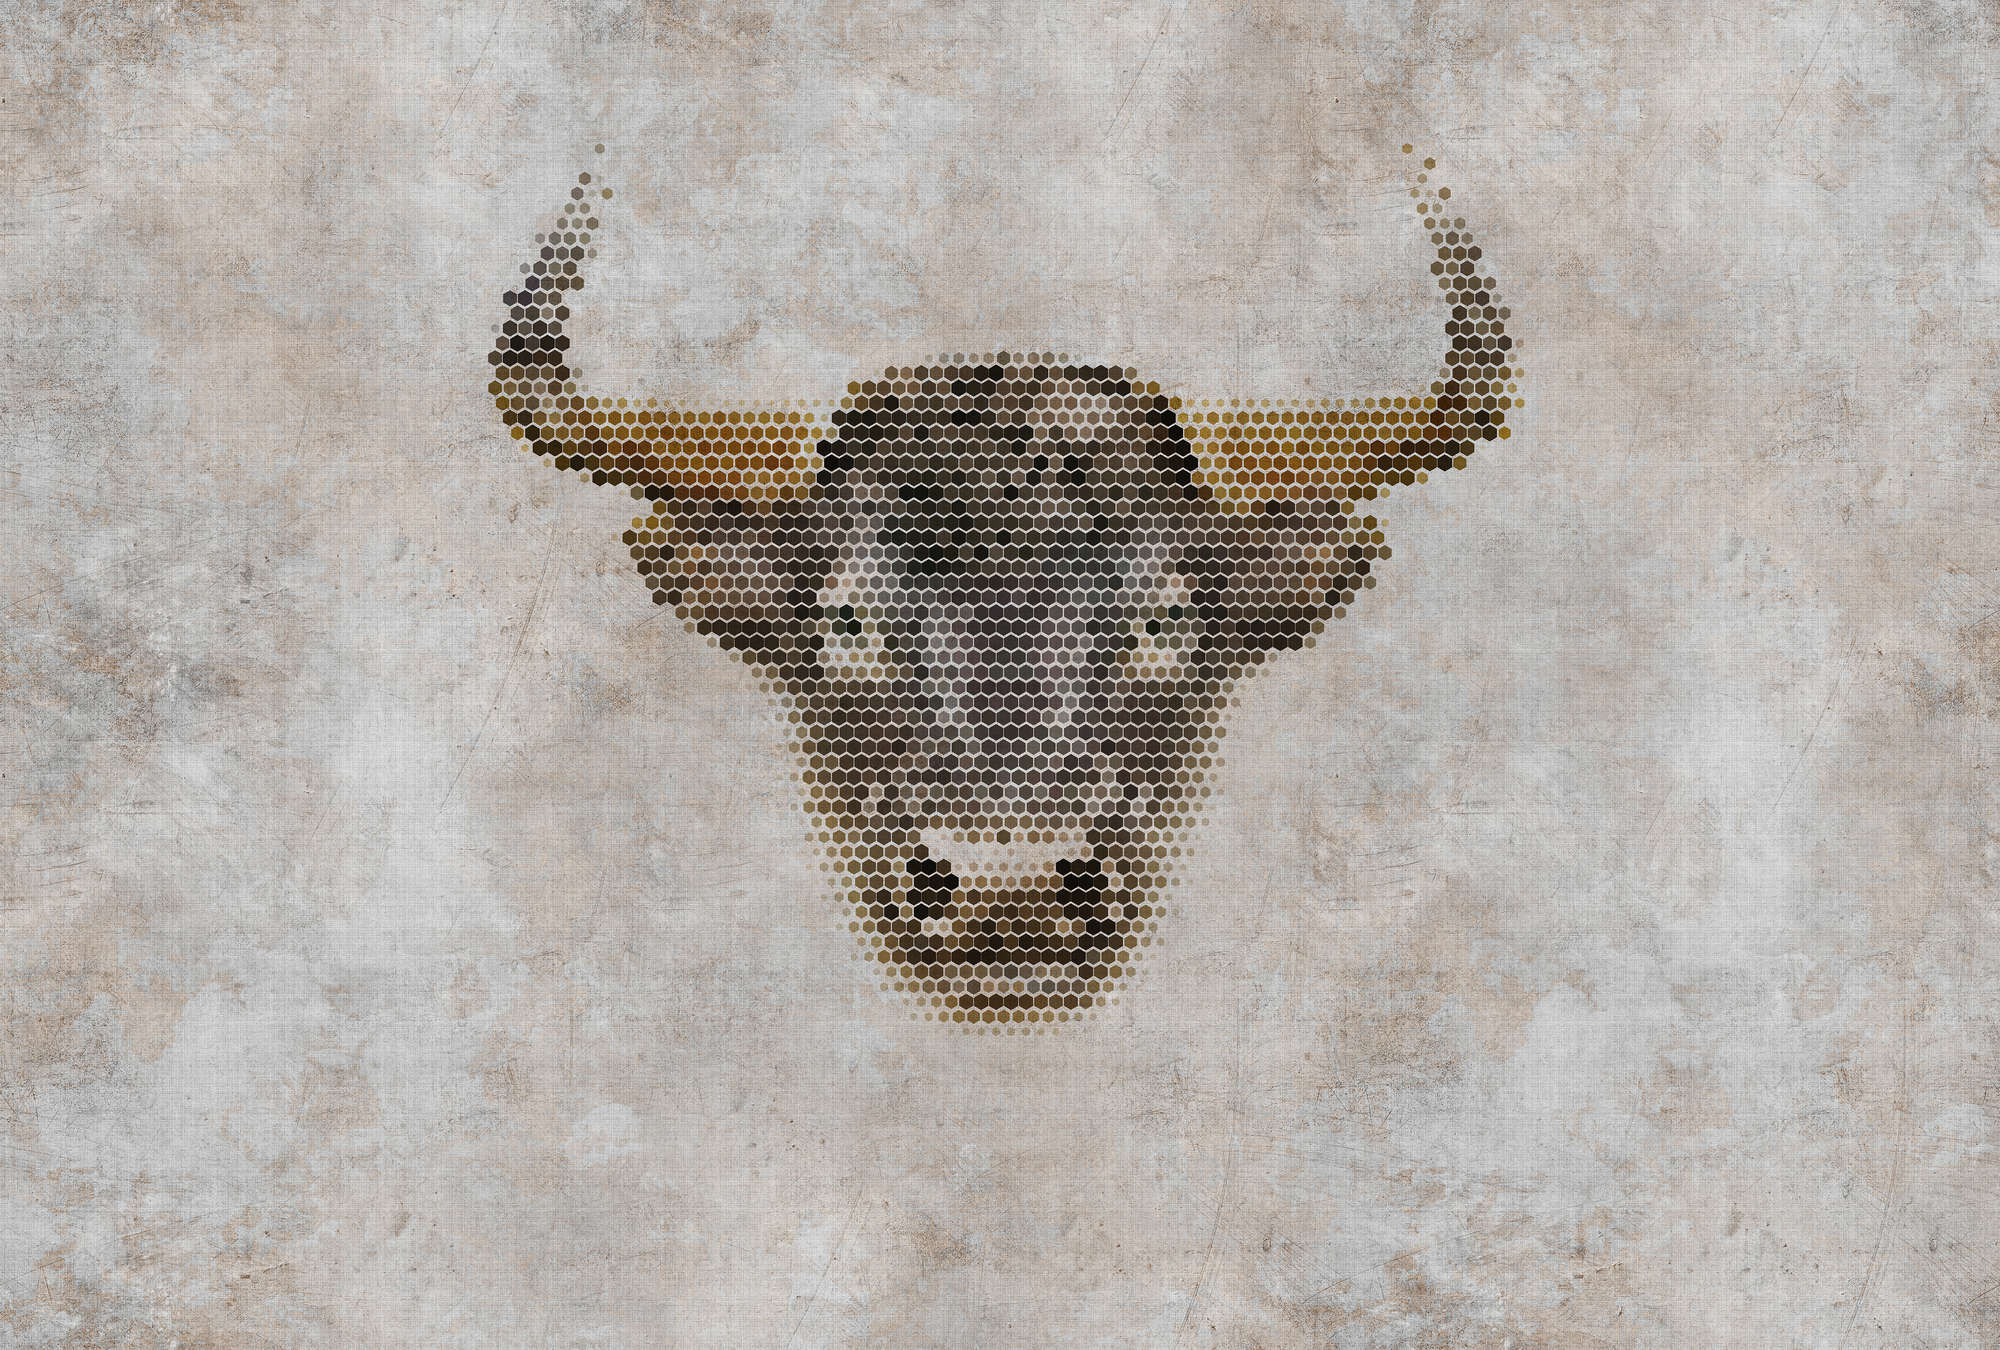             Big three 2 - digital print wallpaper, natural linen structure in concrete look with buffalo - beige, brown | pearl smooth non-woven
        